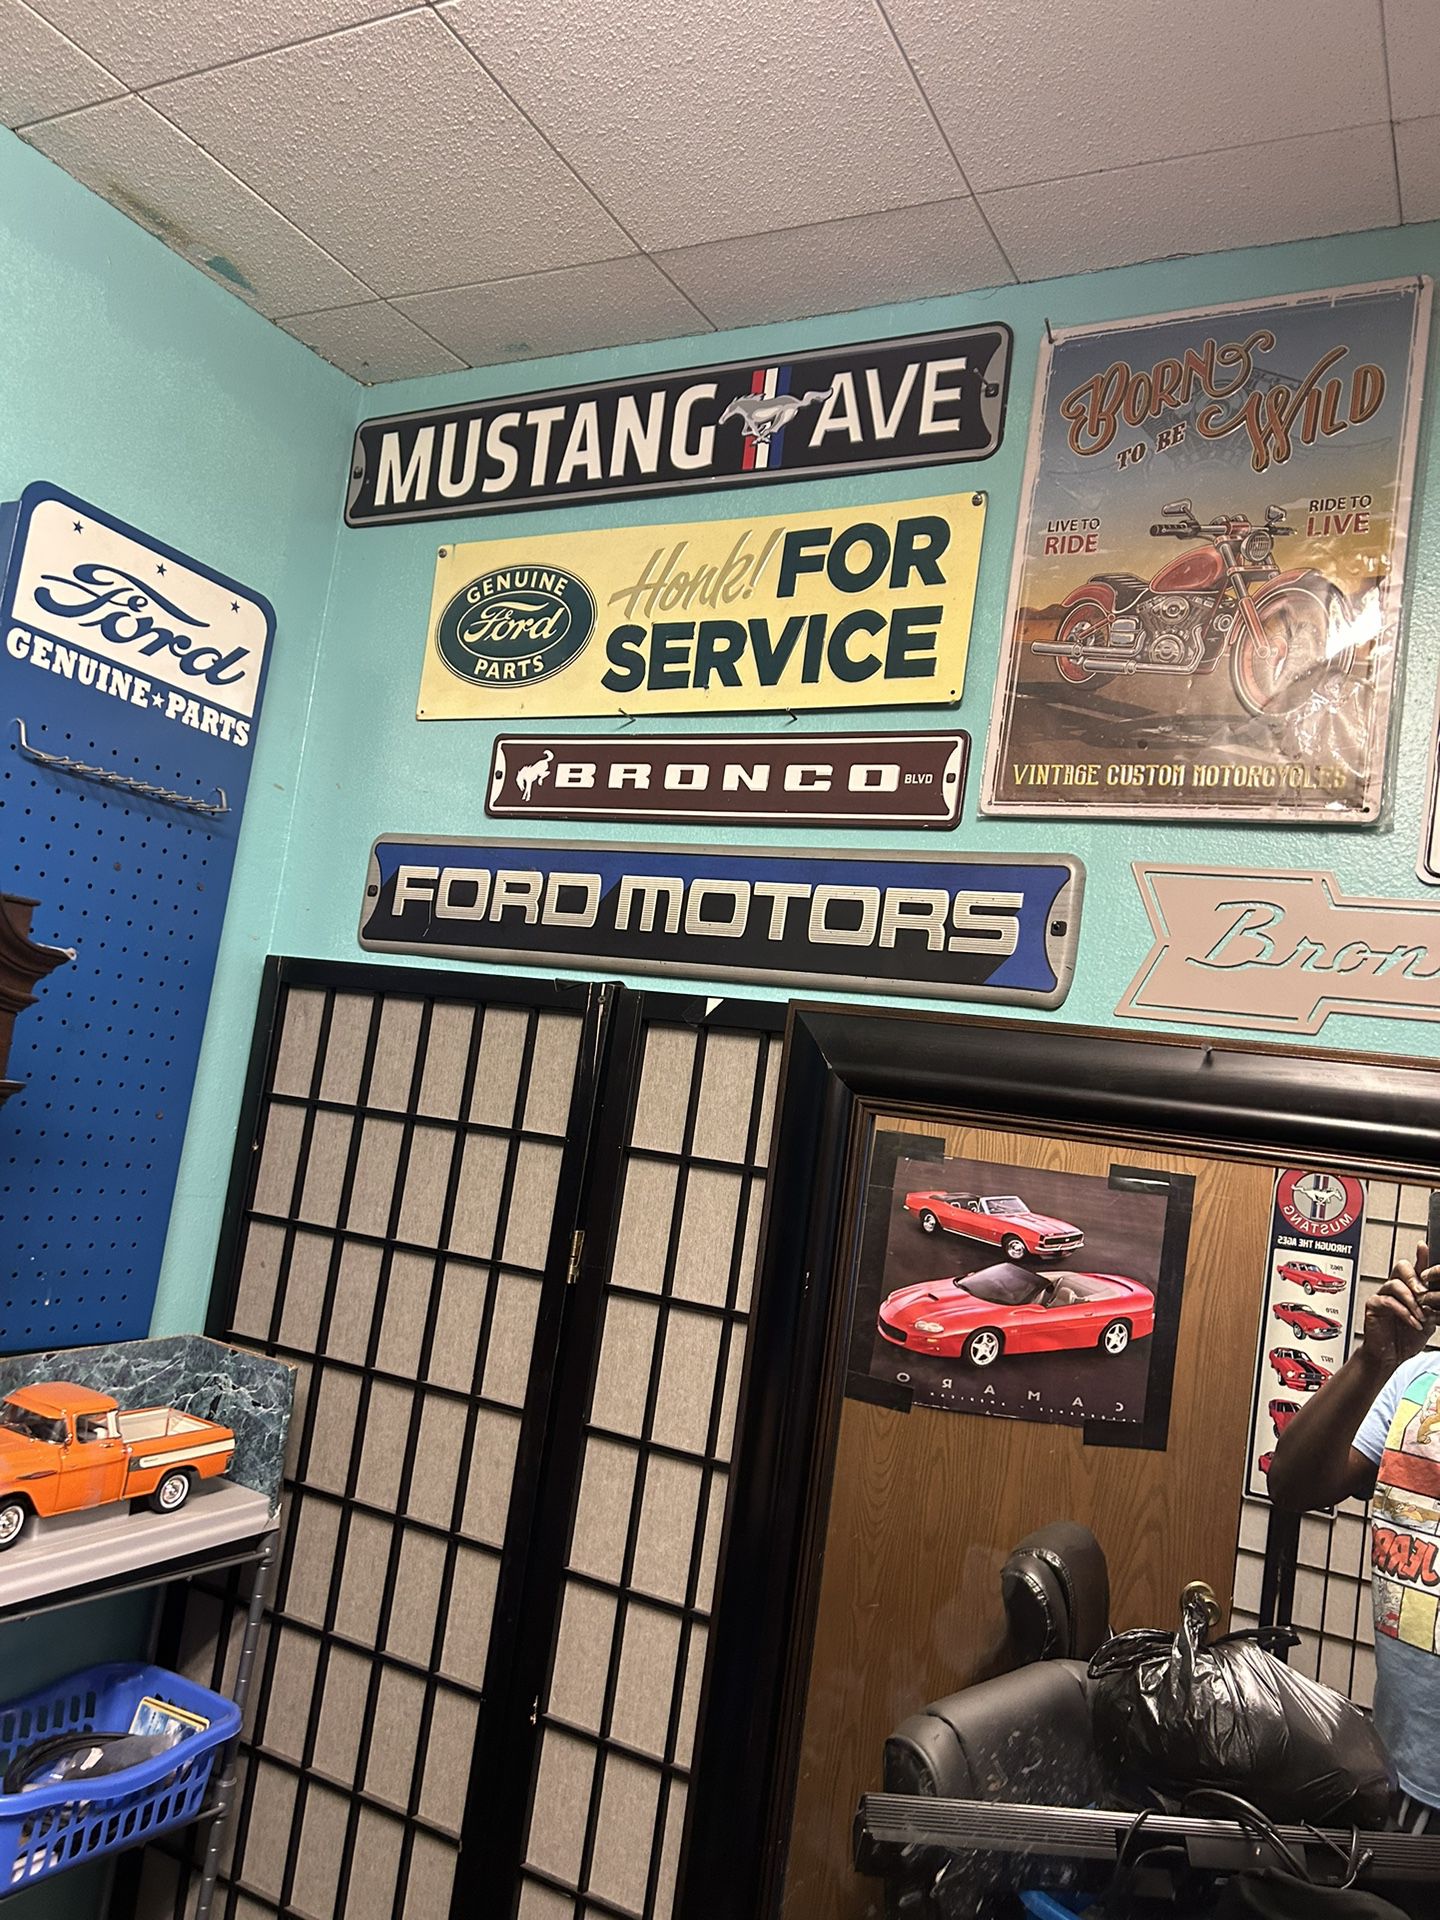 Vintage Cars And Wall Art!